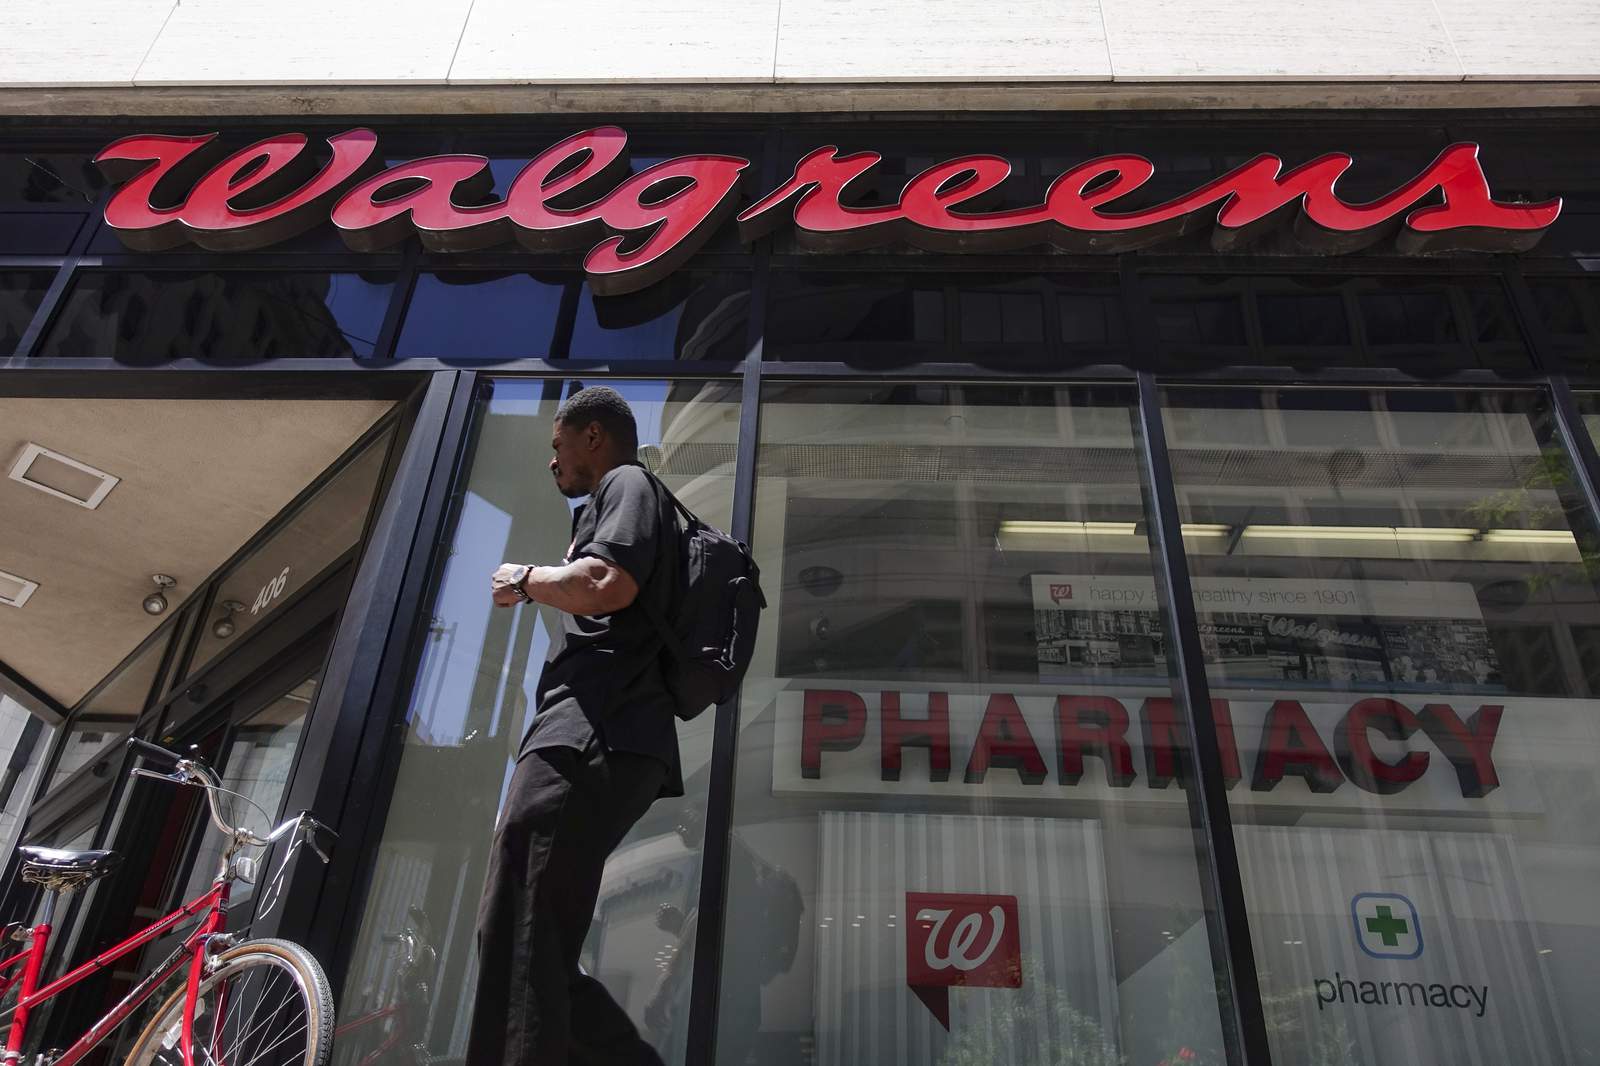 Walgreens plans to open full-service doctors’ offices in hundreds of its stores